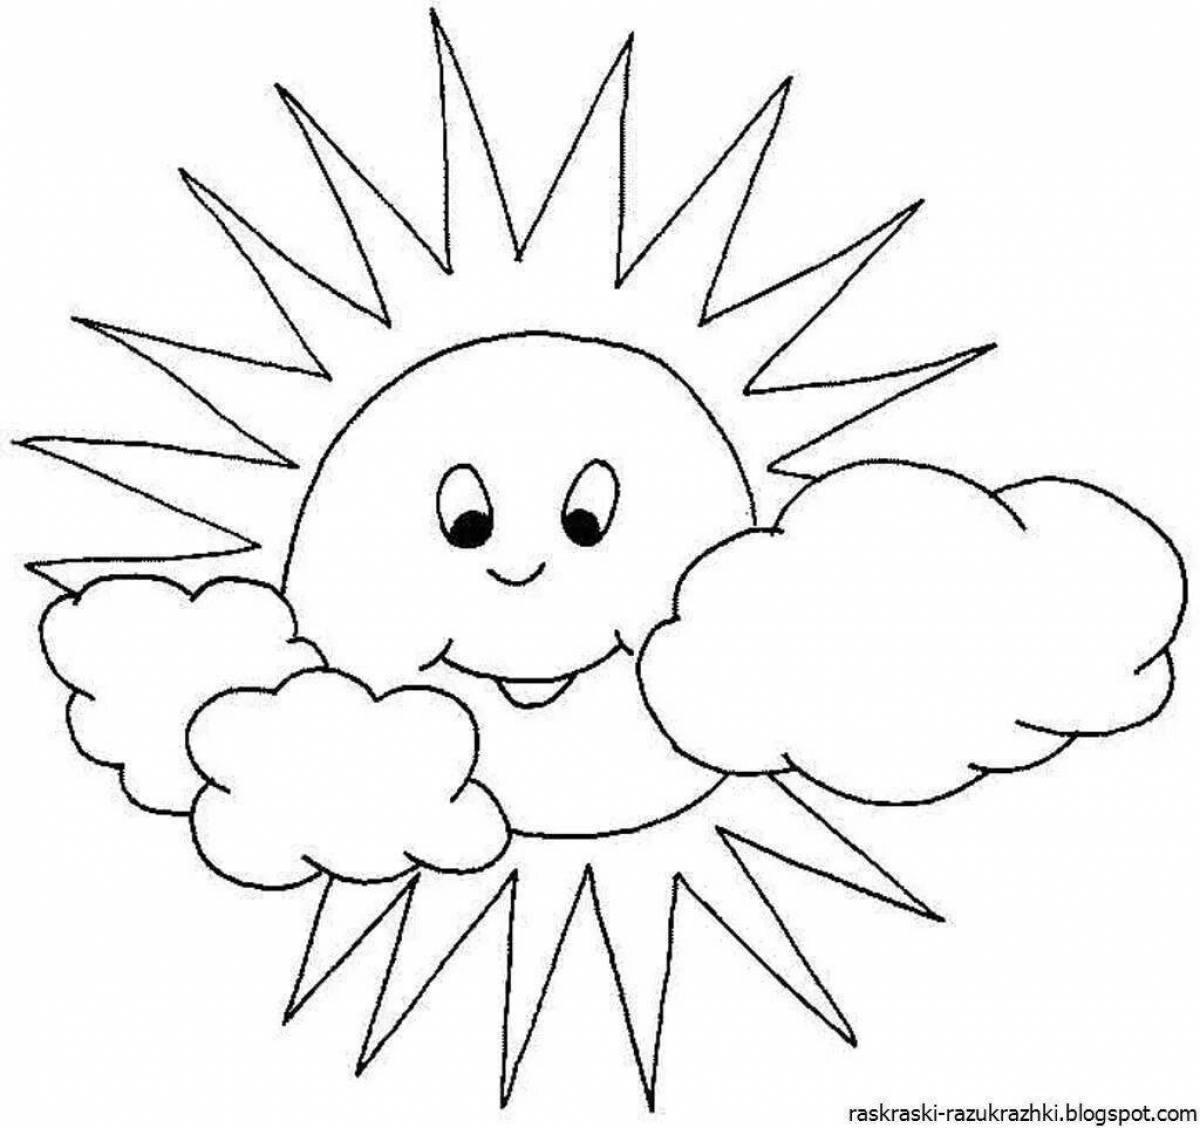 Festive sun coloring book for children 3-4 years old